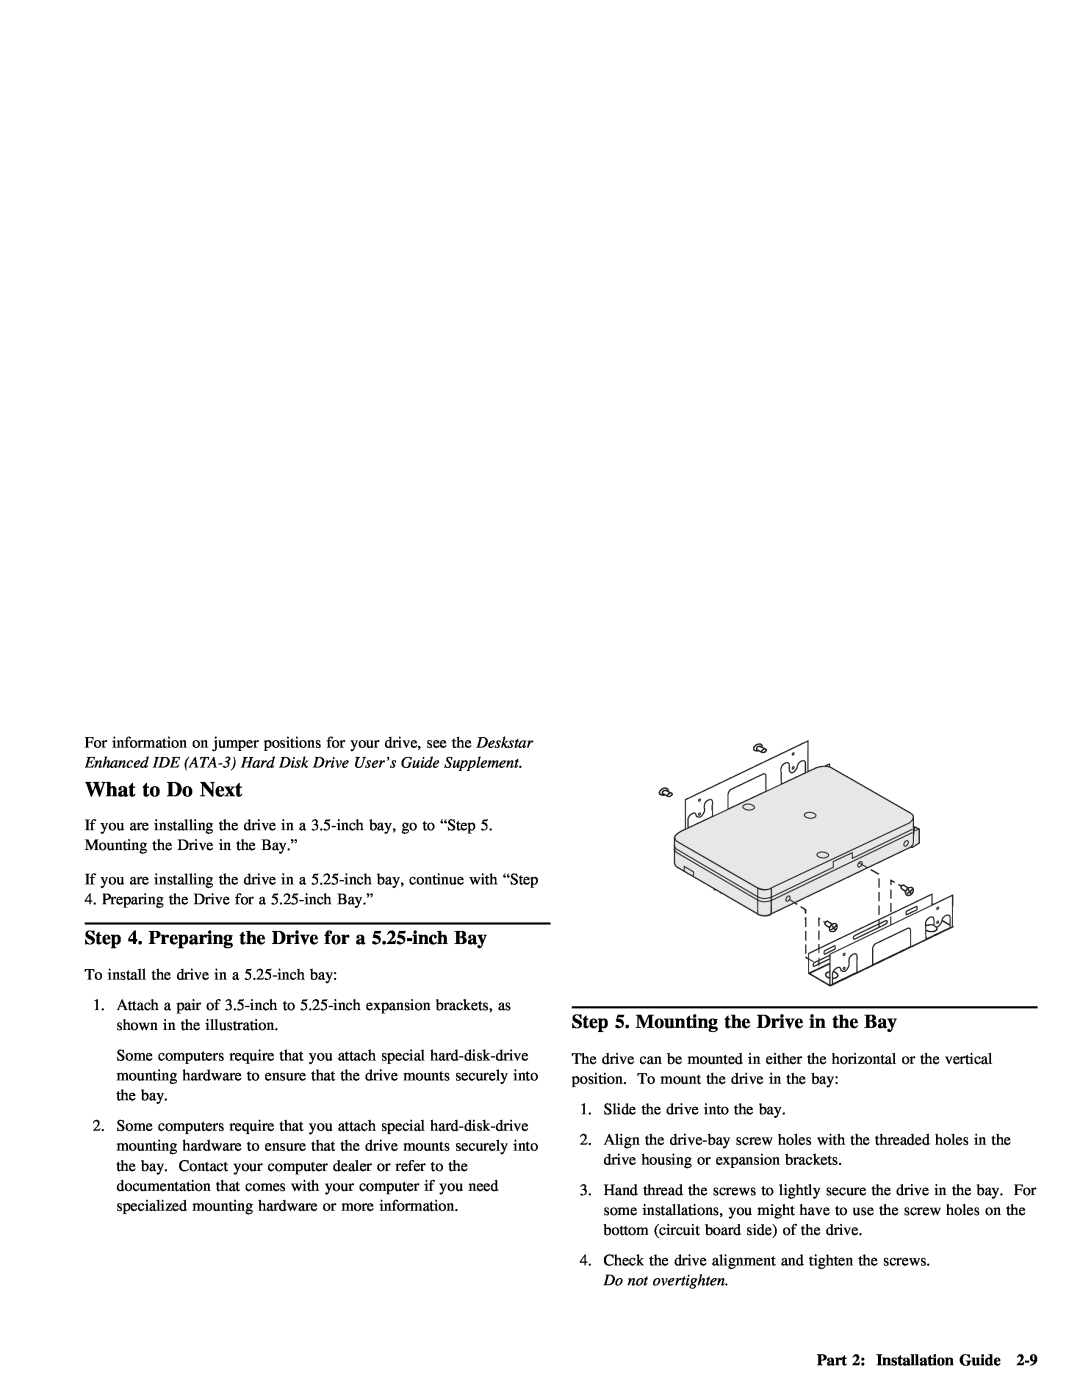 IBM ATA-3 manual Next, Step, Mounting the Drive in the Bay, What 